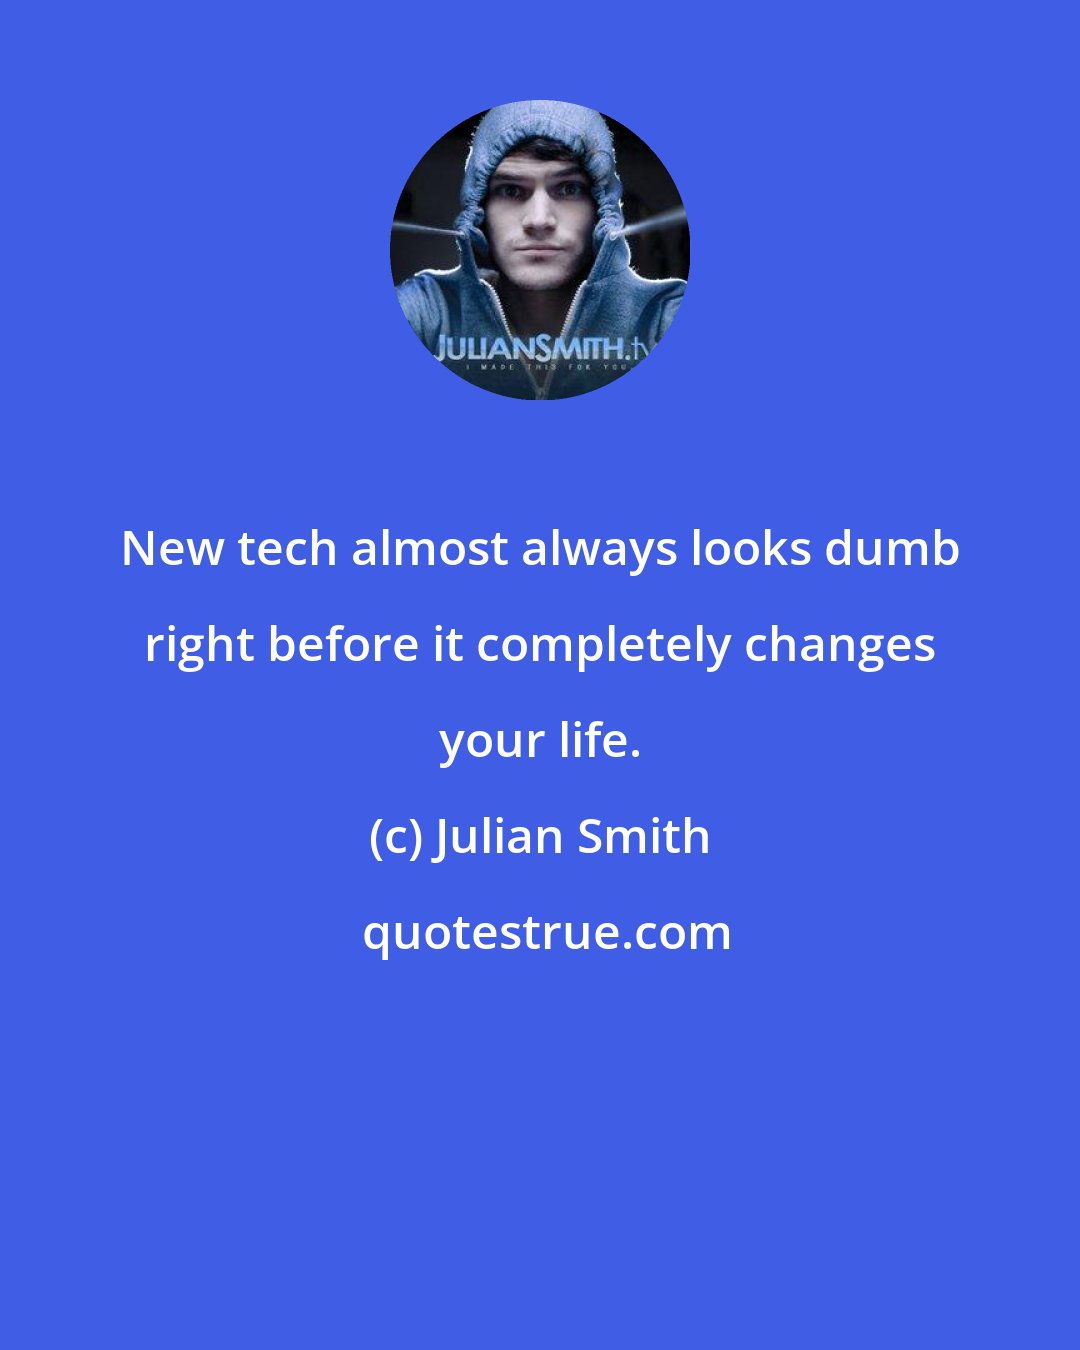 Julian Smith: New tech almost always looks dumb right before it completely changes your life.